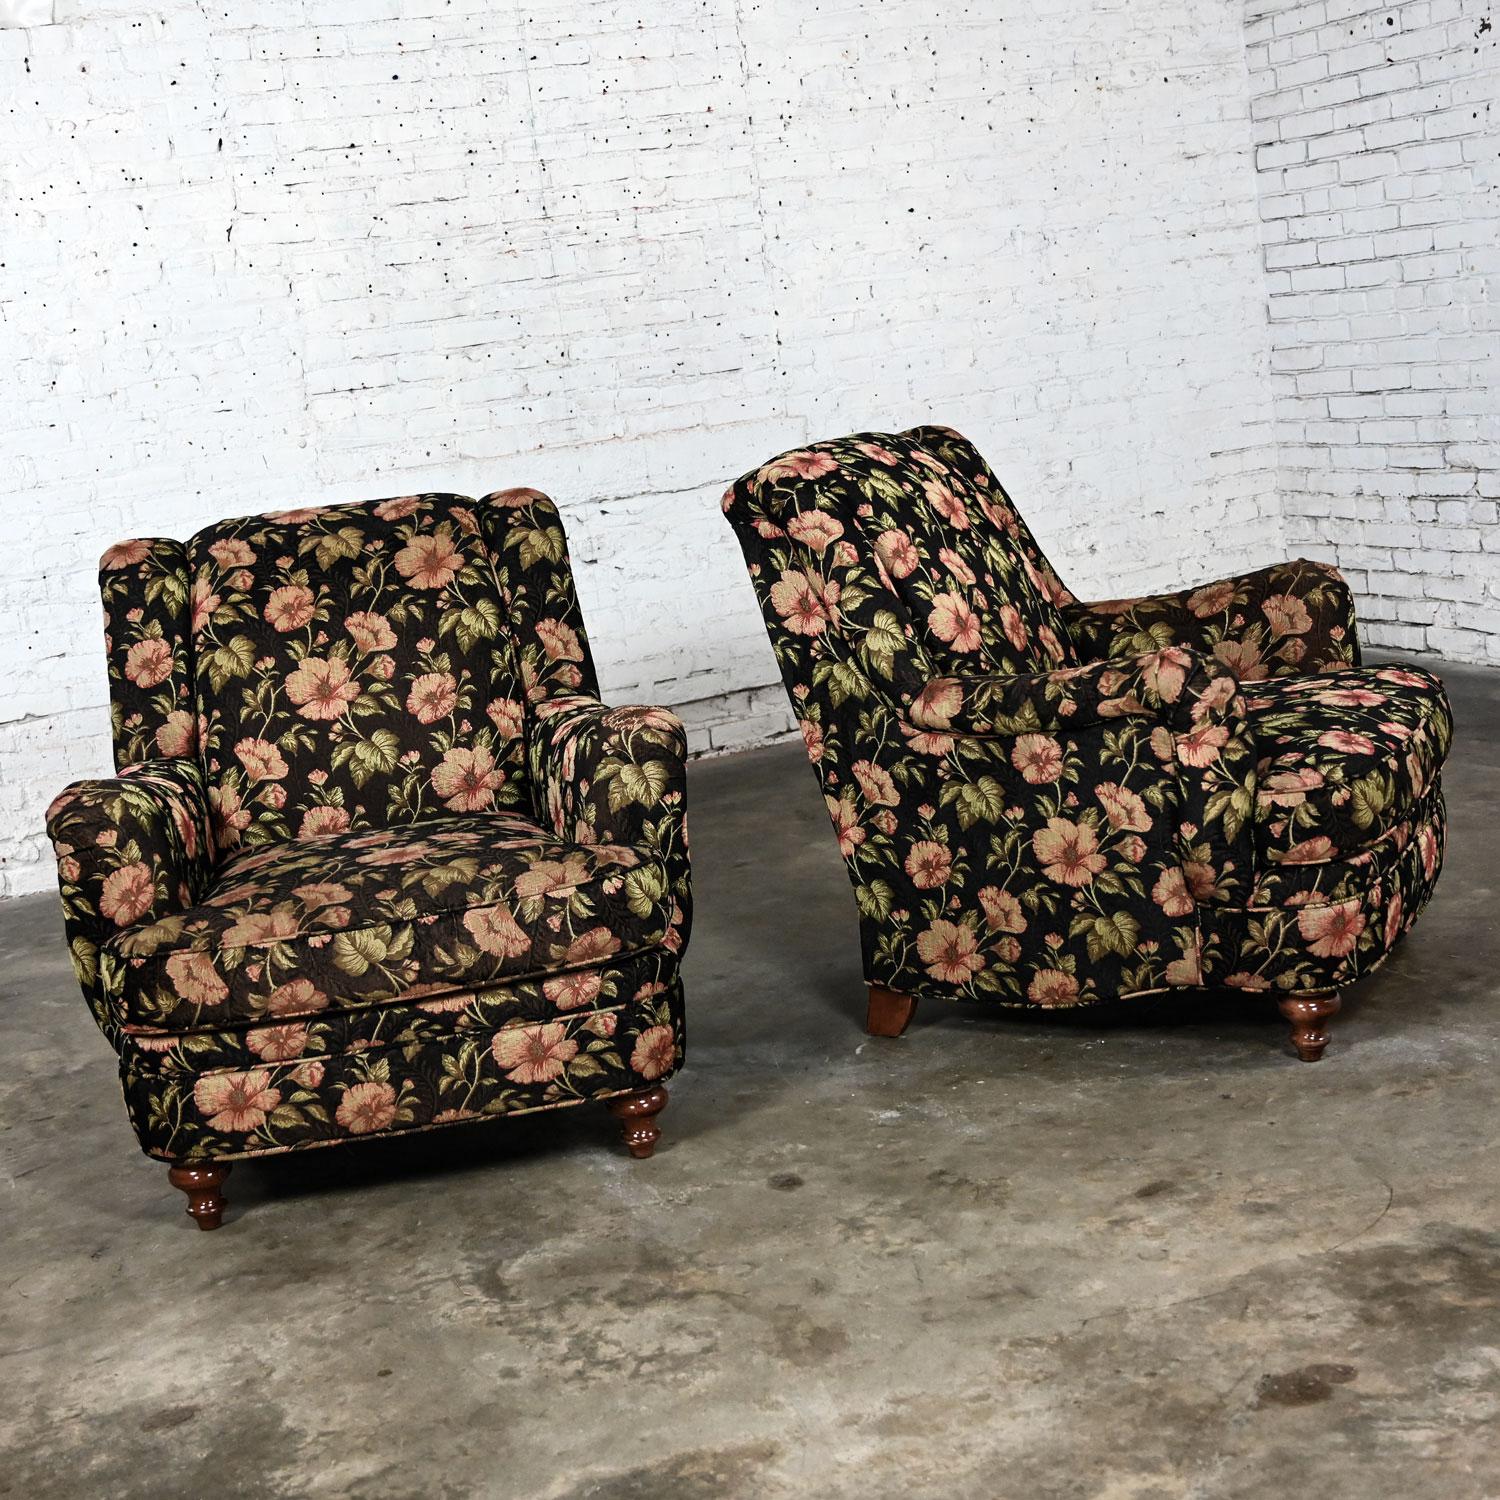 Fabric Cottagecore Style Pair Floral Lounge Chairs Sam Moore Furniture Division Hooker For Sale